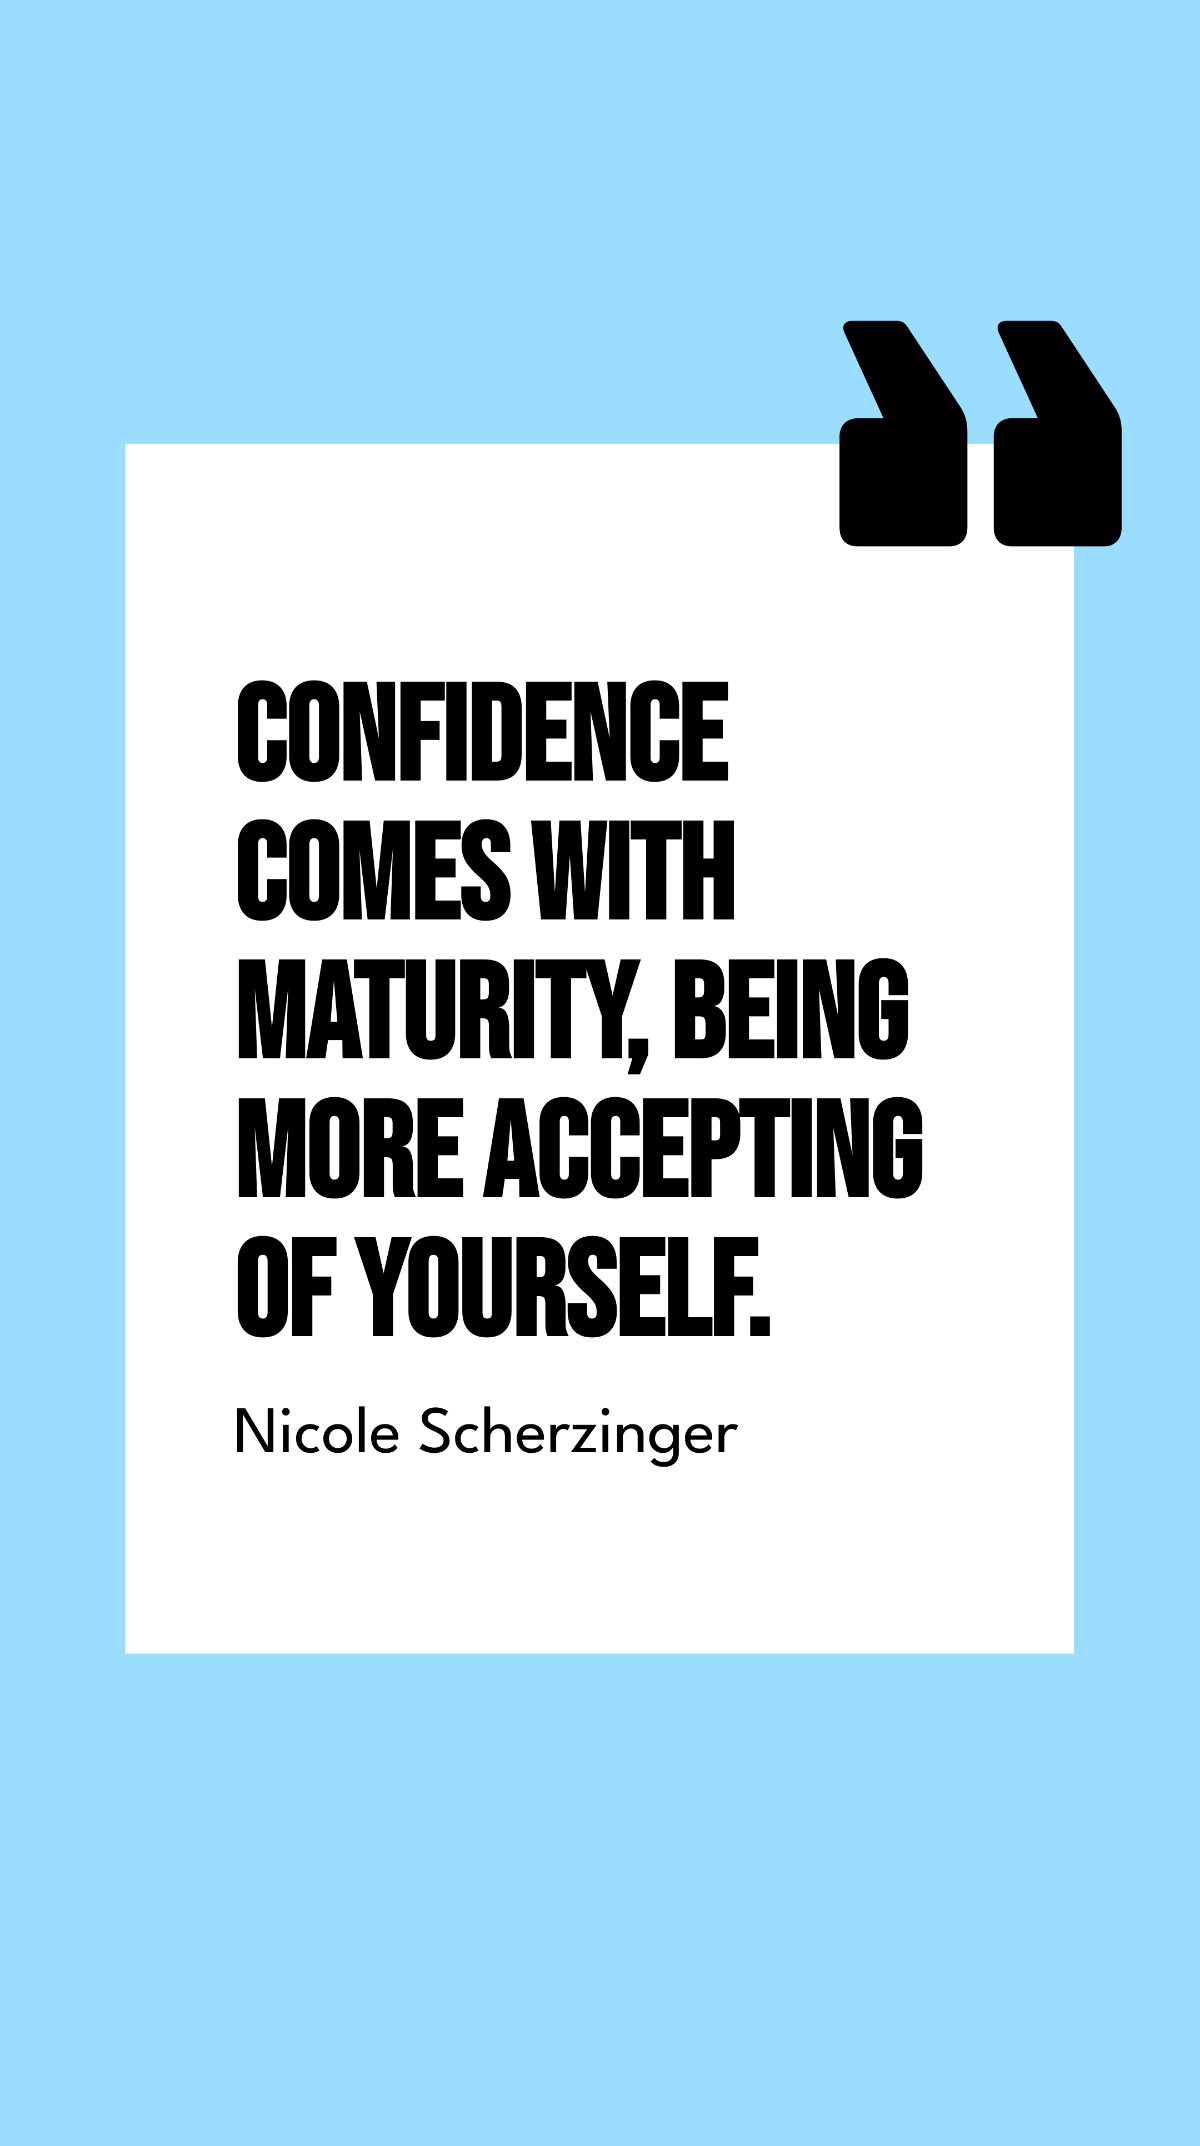 Nicole Scherzinger - Confidence comes with maturity, being more accepting of yourself.